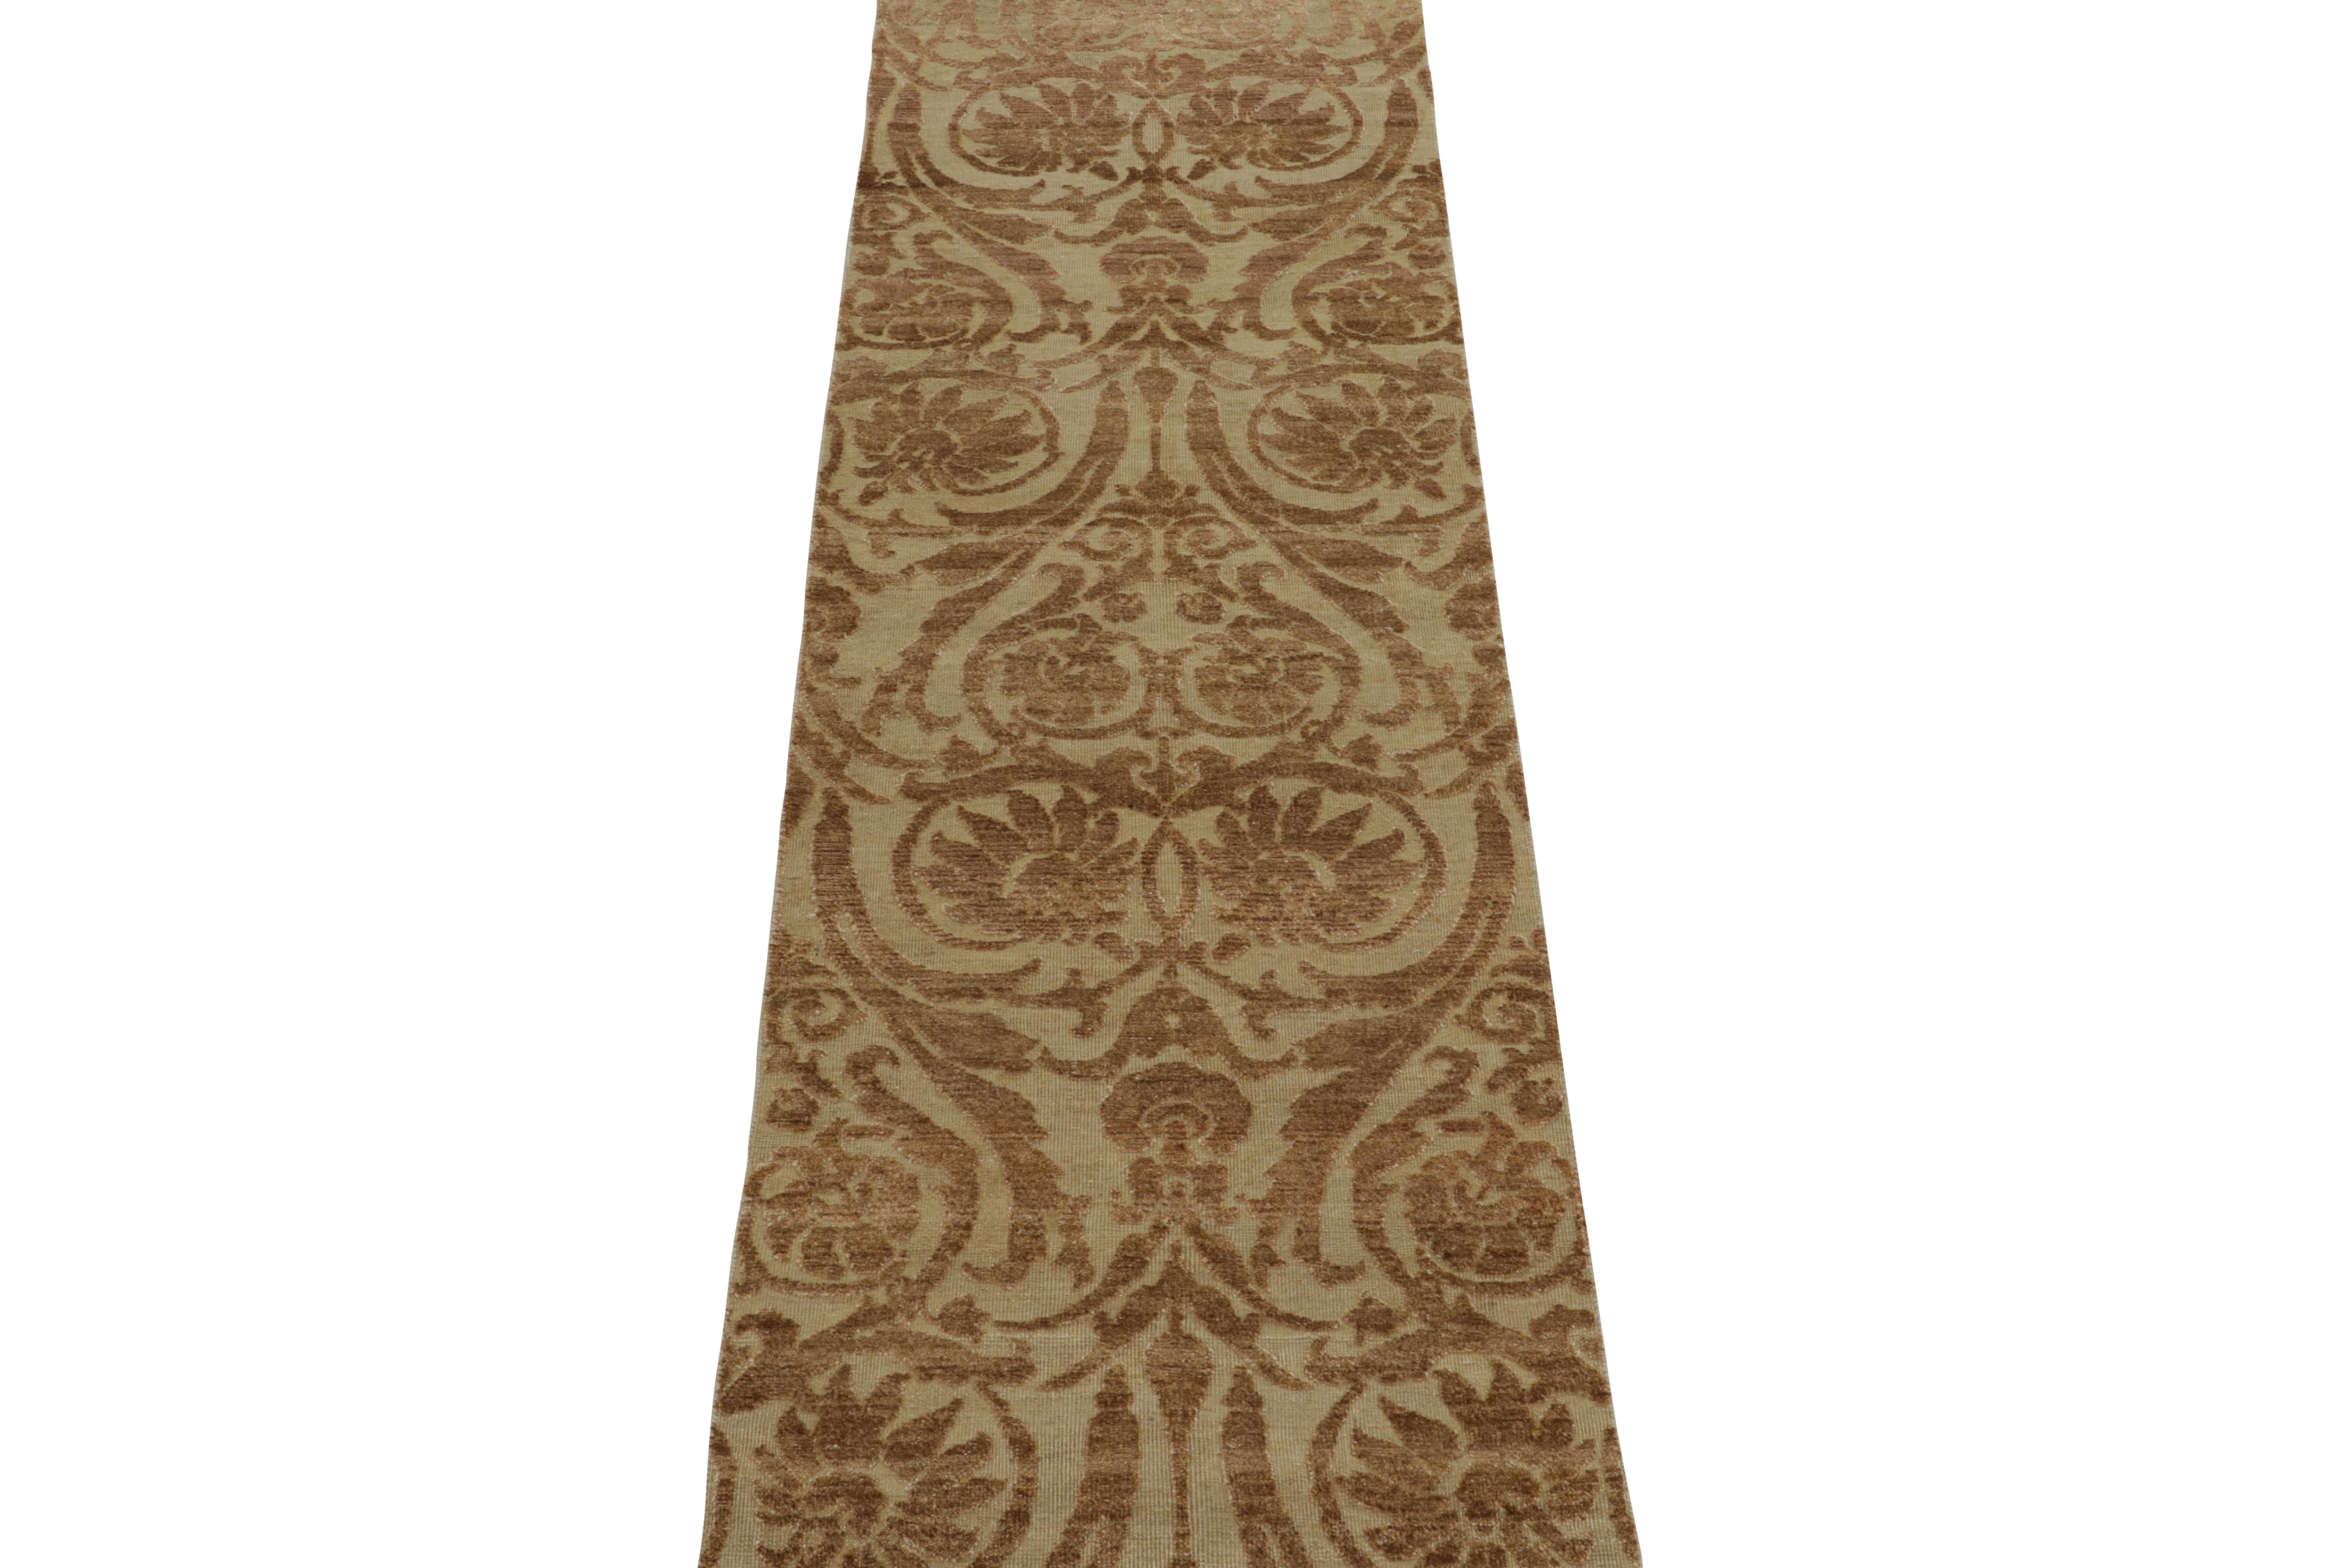 Indian Rug & Kilim’s European Style Twin Runners in Beige with Brown Floral Patterns For Sale